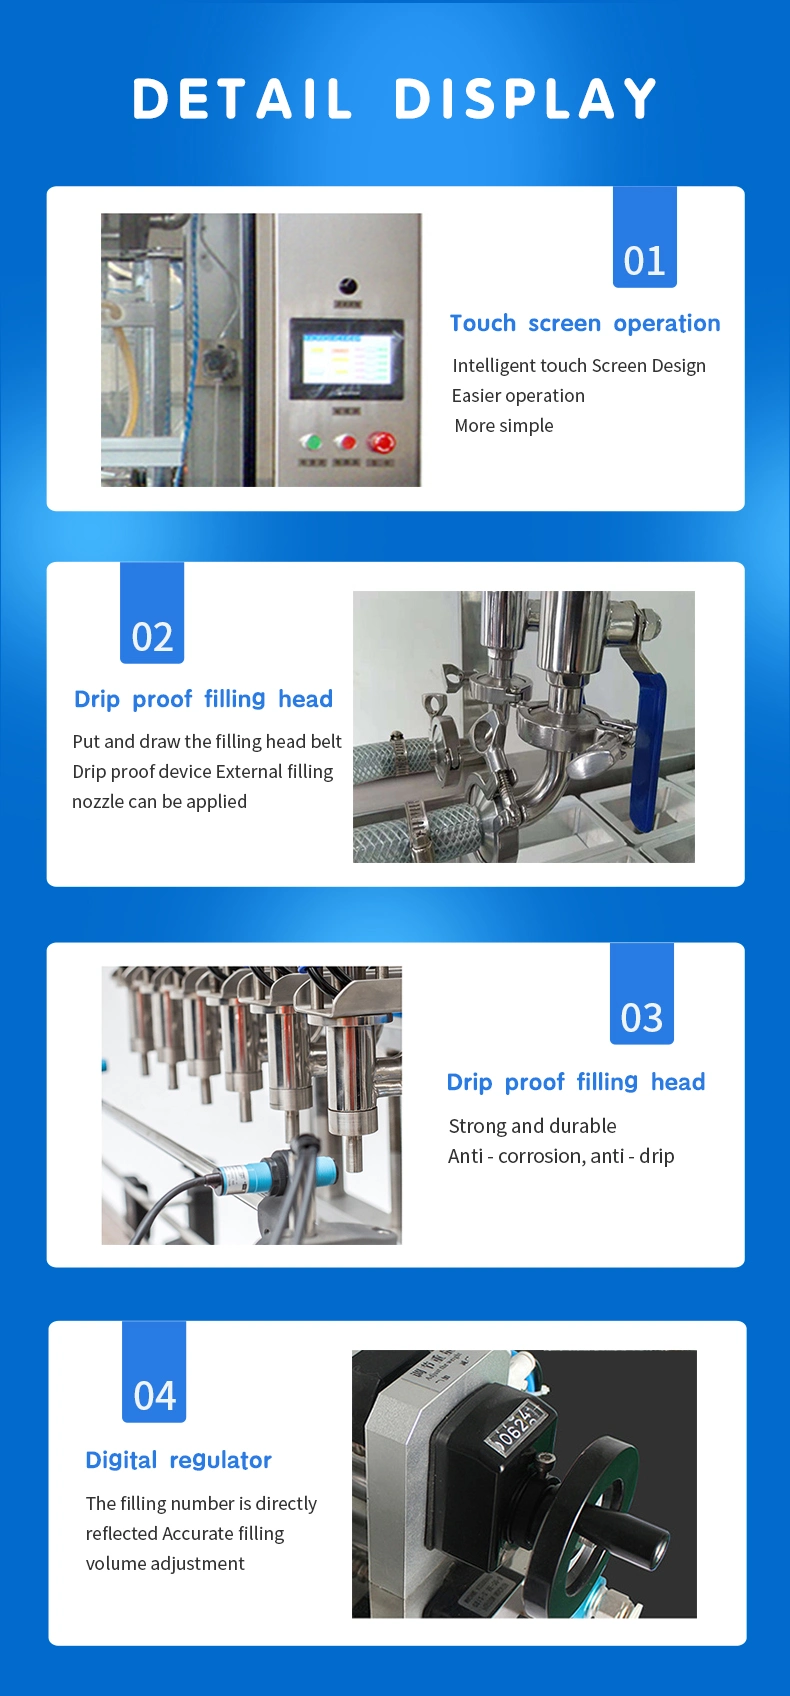 Top Piston Liquid Filling and Capping Machine for Universal Filling